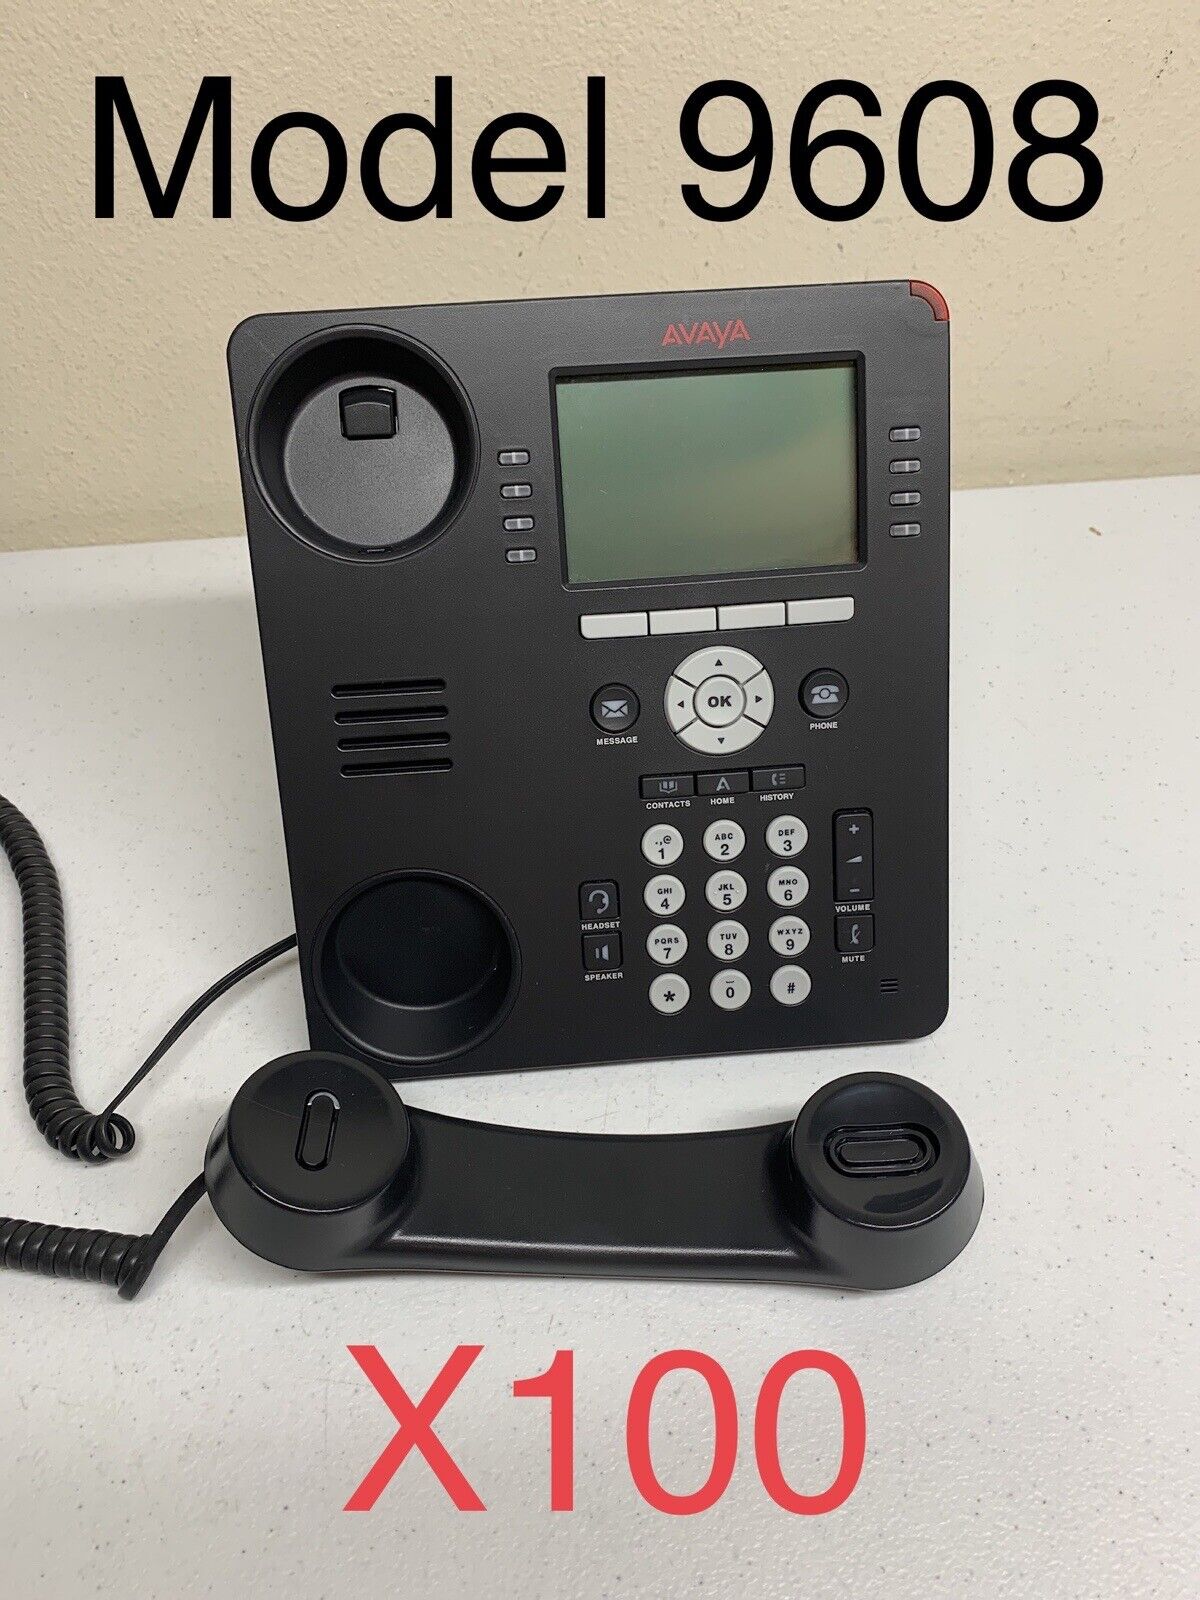 Avaya 9608/ Desktop Phone with Handset and Stand Lot of 100 Units